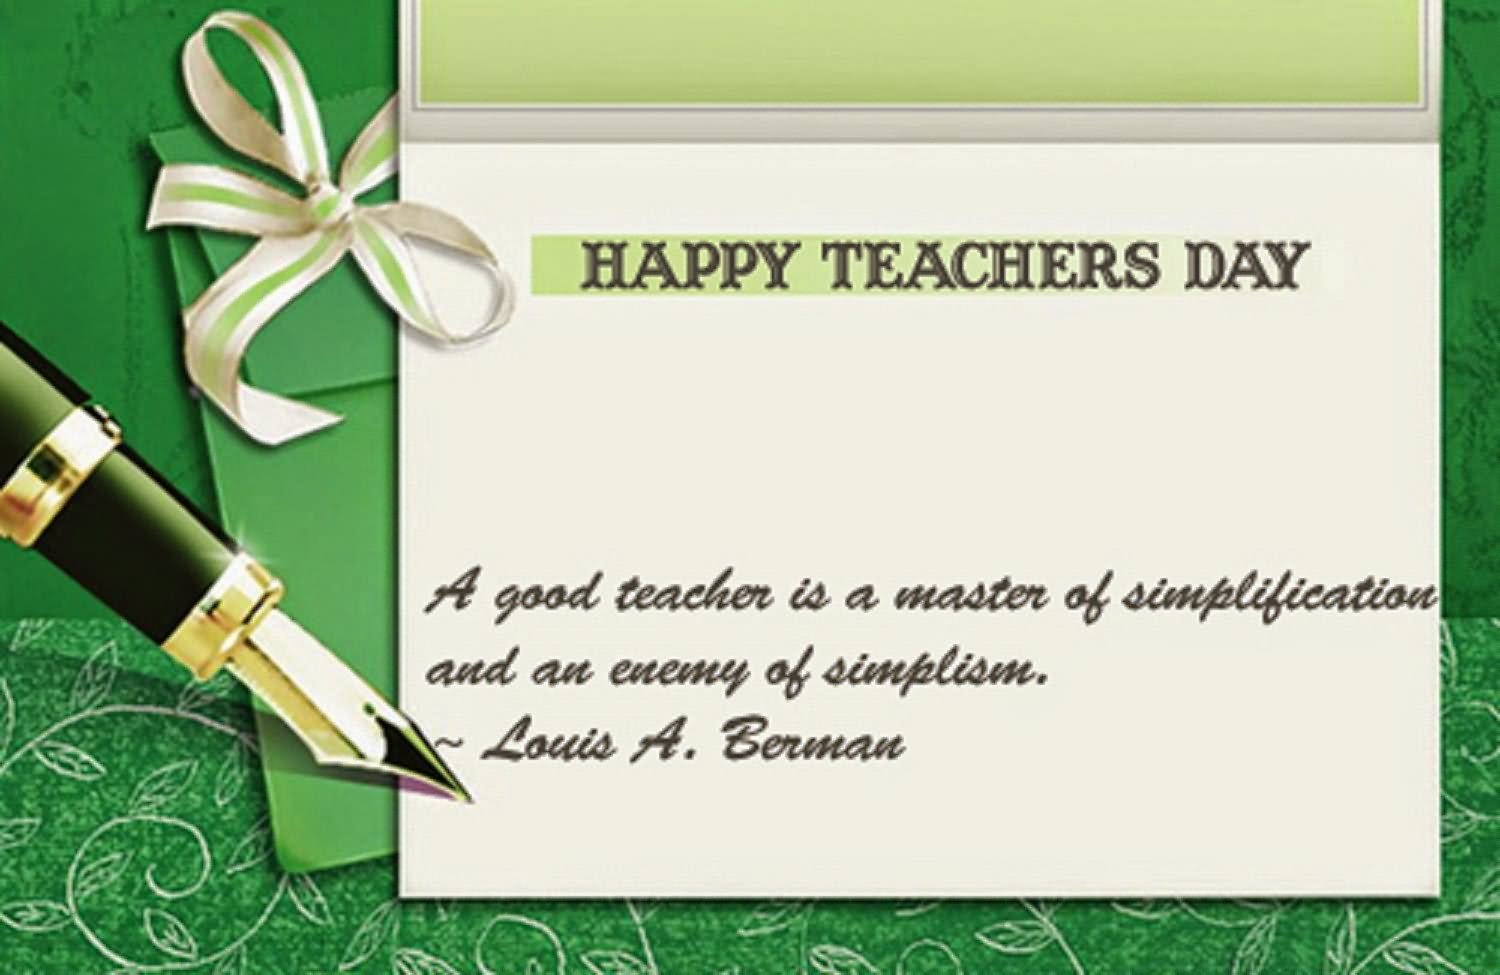 Teachers Day Card Message | Messages to Write on Teacher’s Day Card